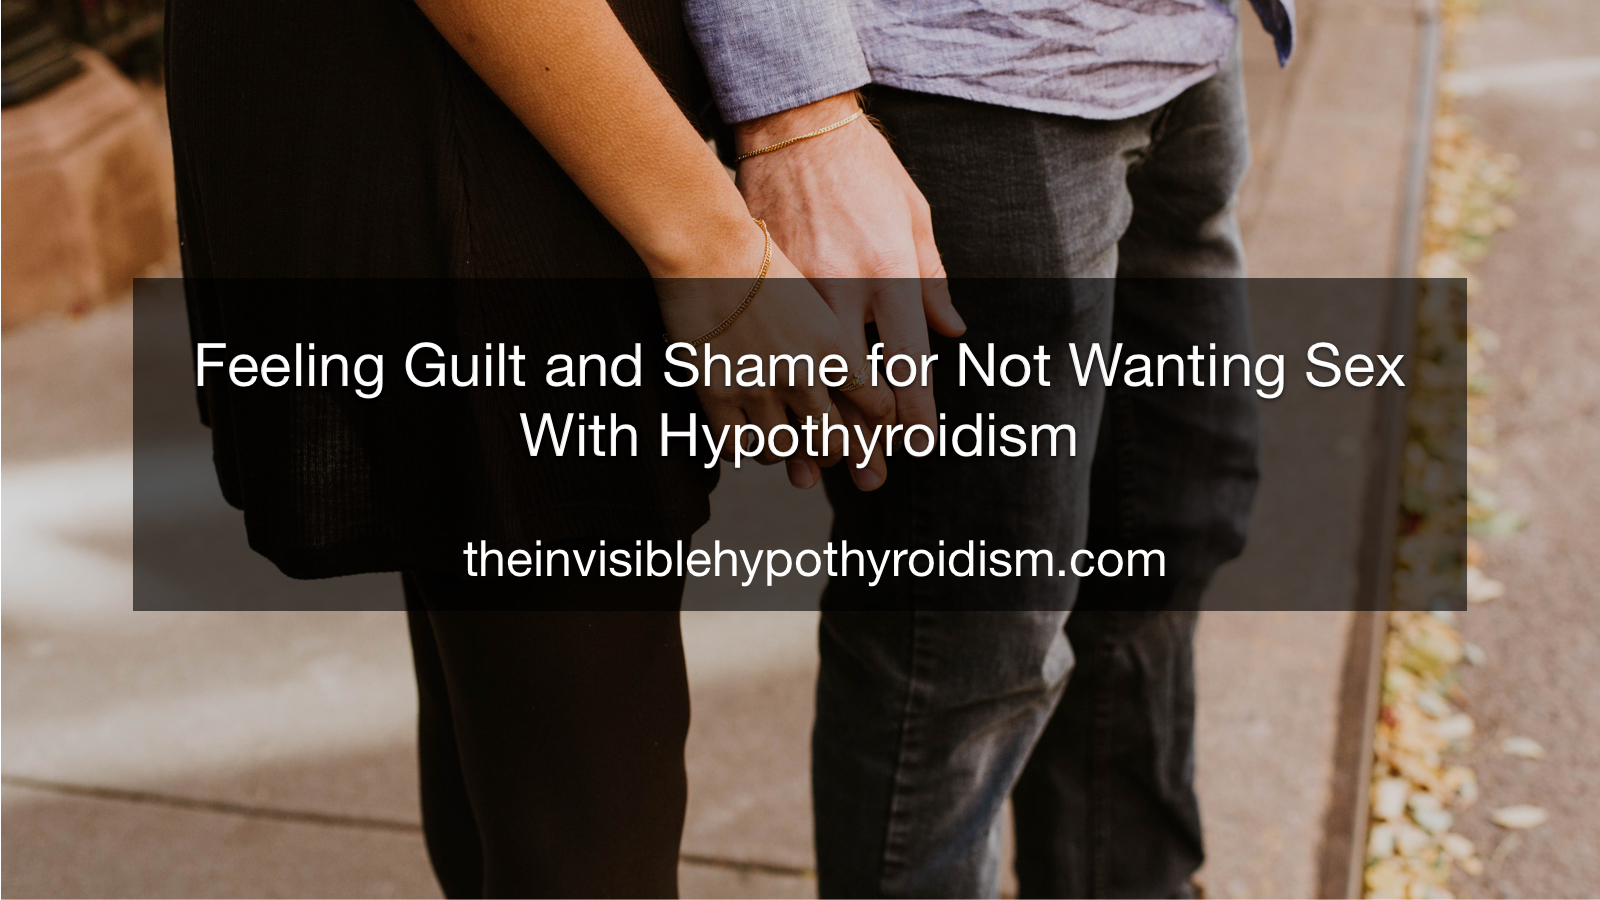 Feeling Guilt and Shame for Not Wanting Sex With Hypothyroidism